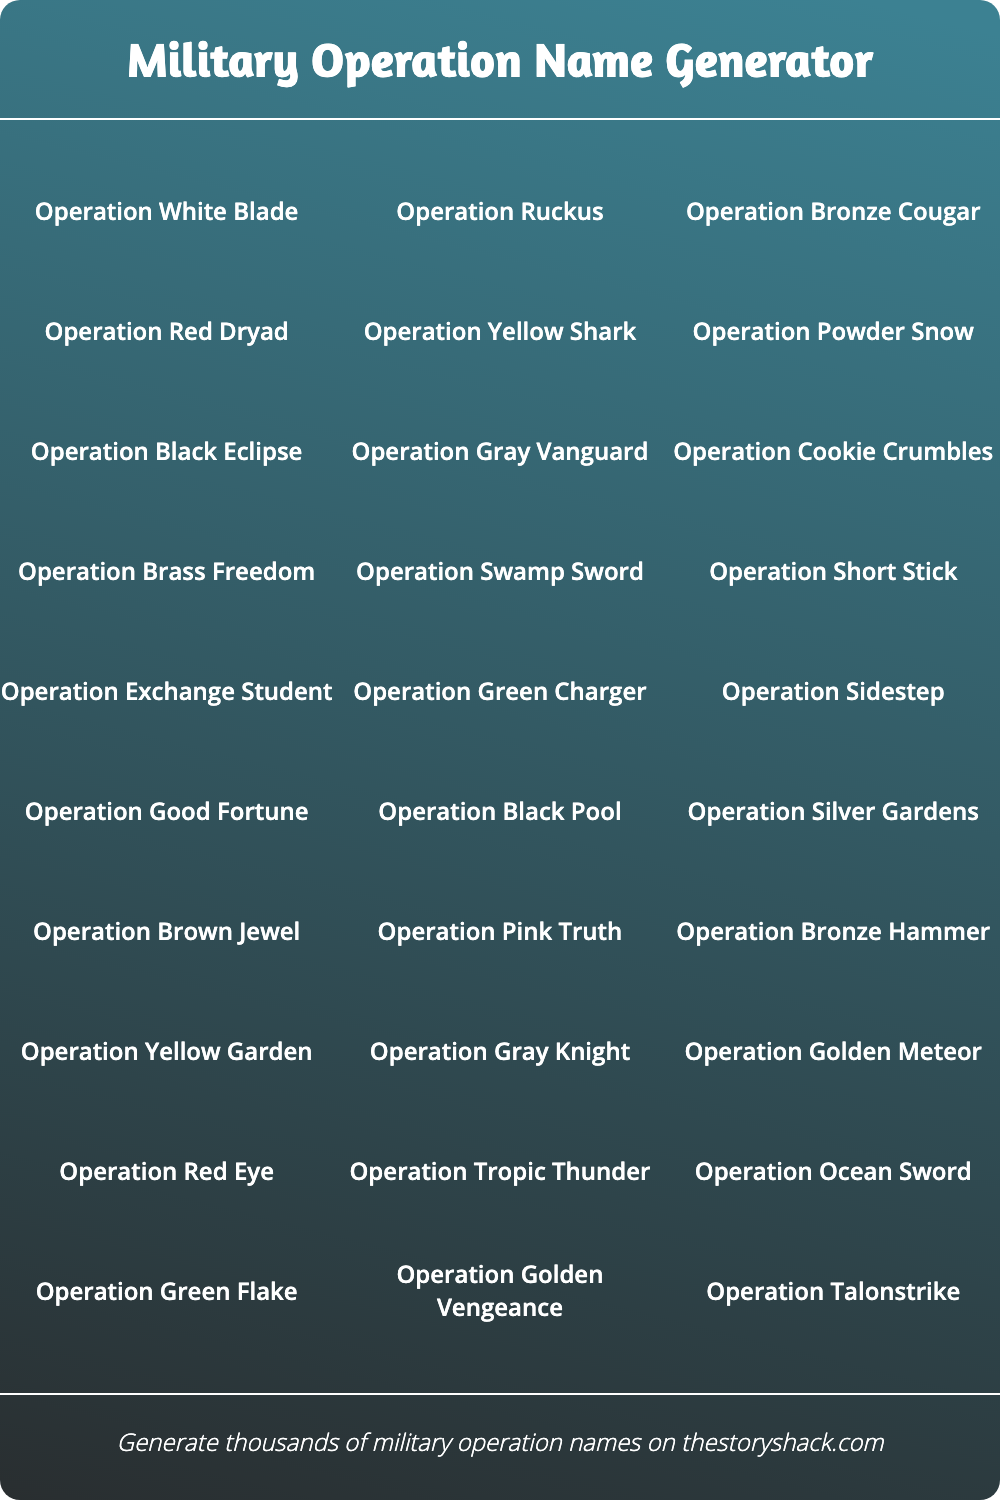 Military Operation Name Generator - Find ideas